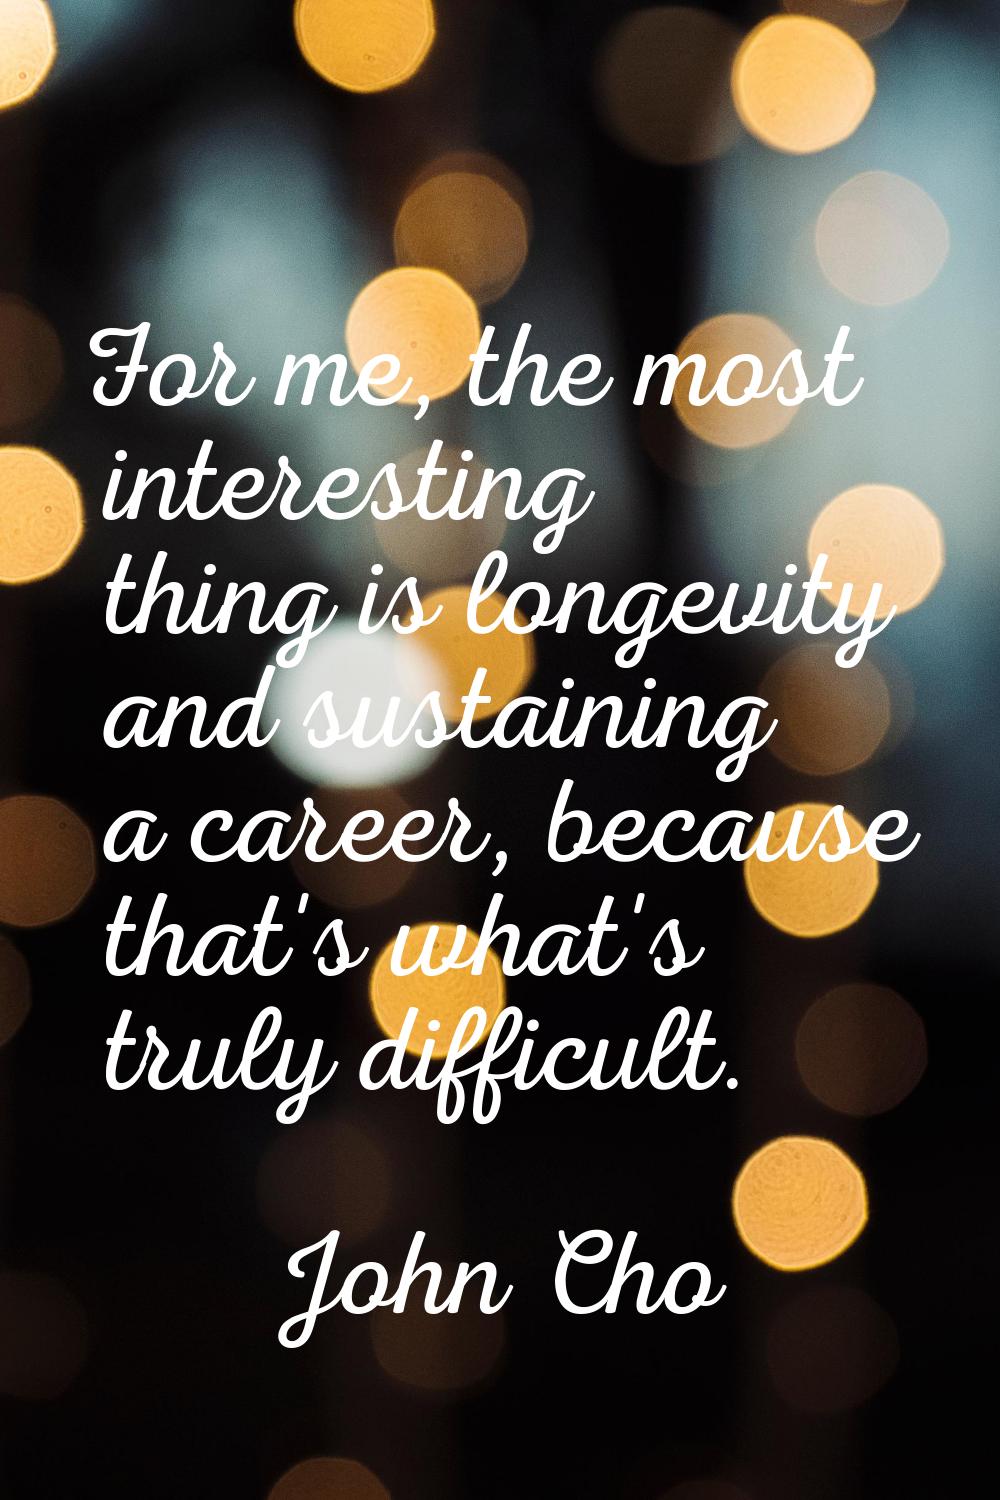 For me, the most interesting thing is longevity and sustaining a career, because that's what's trul